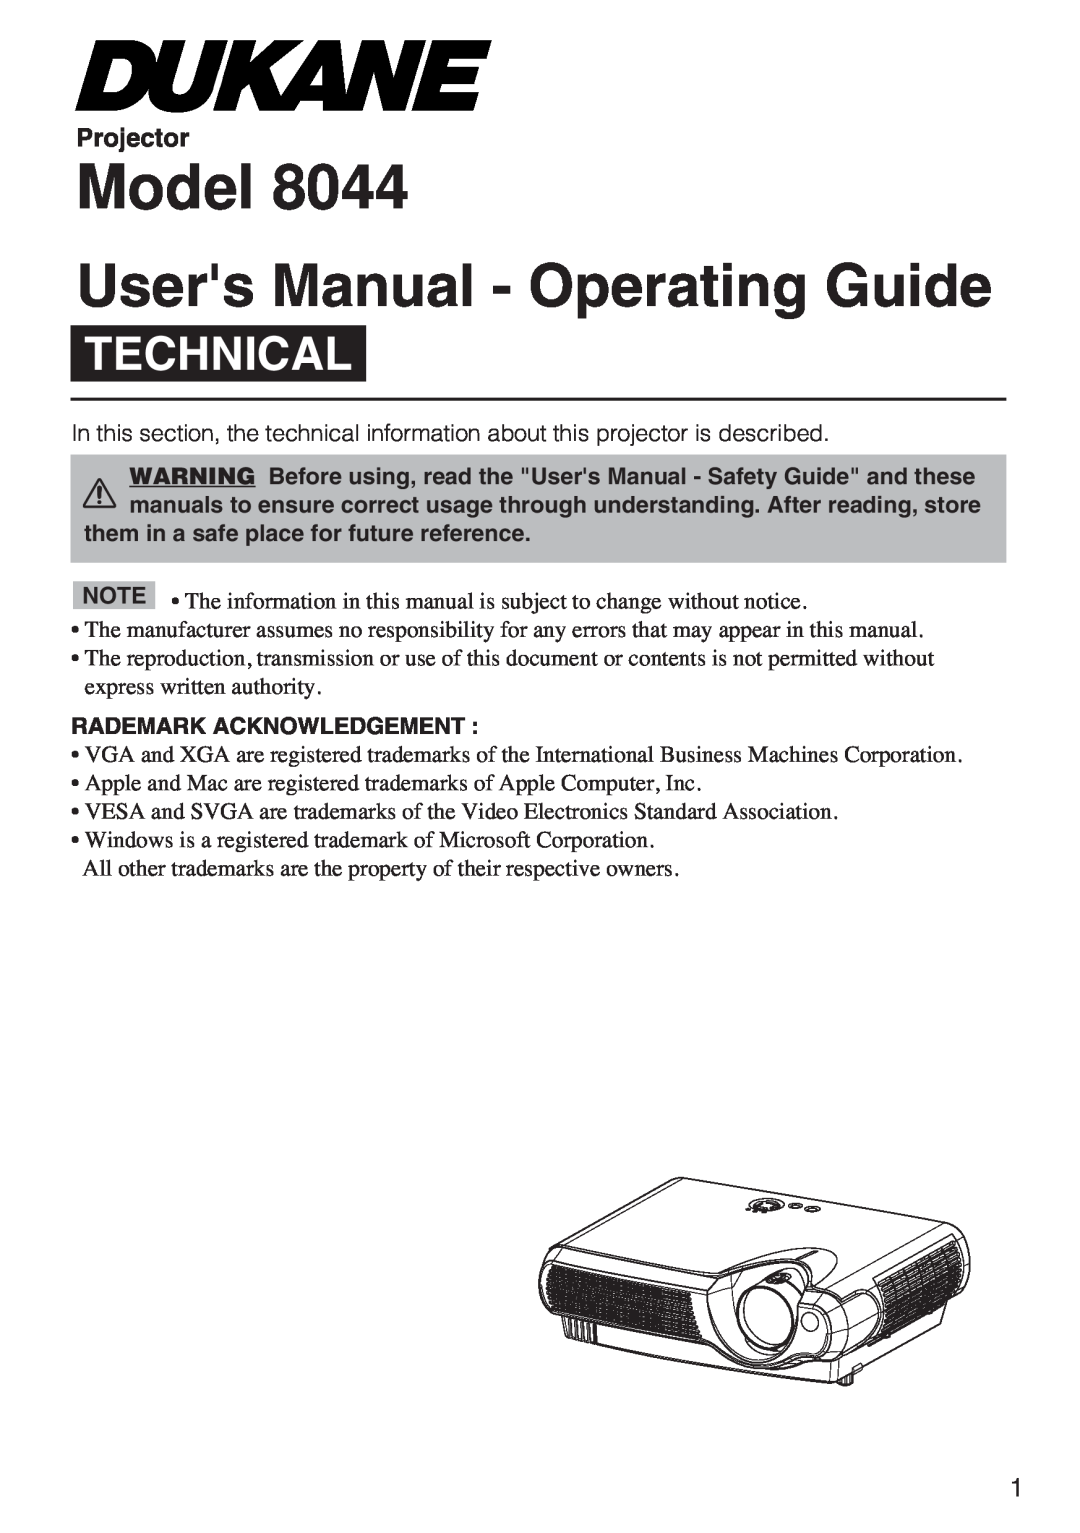 Dukane 8044 manual Projector, Model, Users Manual - Operating Guide, Technical, them in a safe place for future reference 